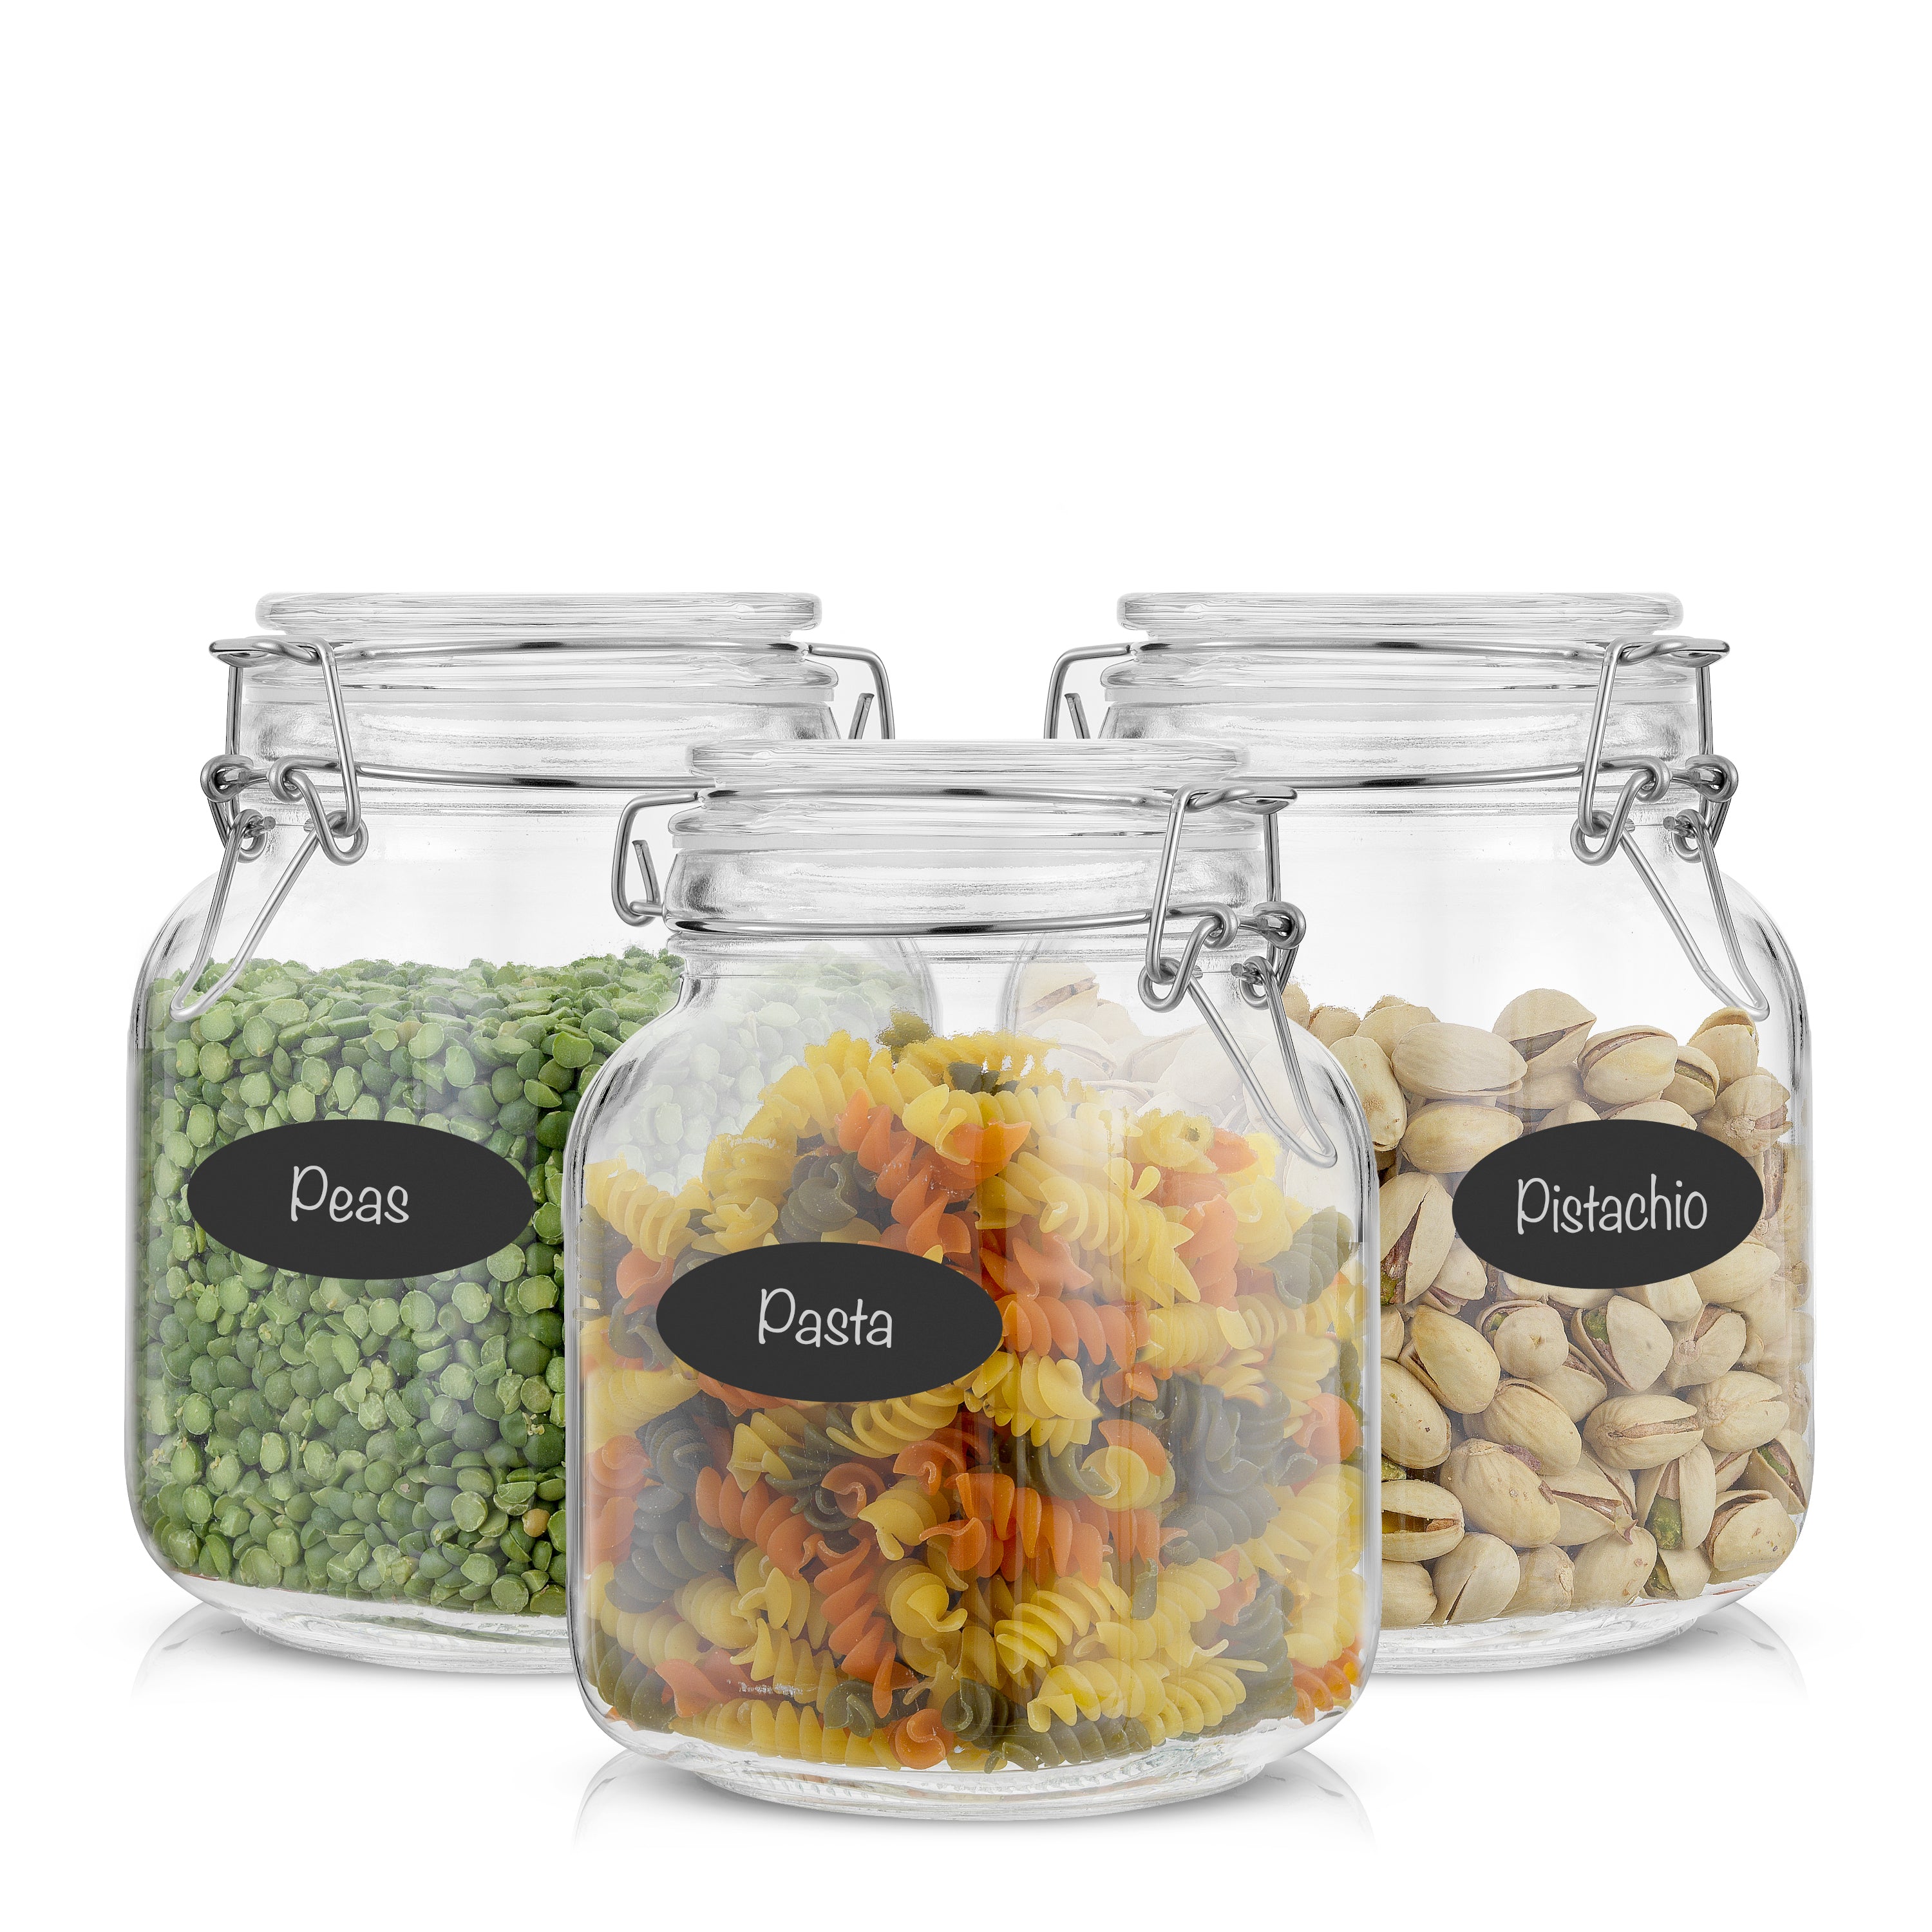 Airtight Glass Jars Storage Cannister with Silicone Seal Lids - Set of 3